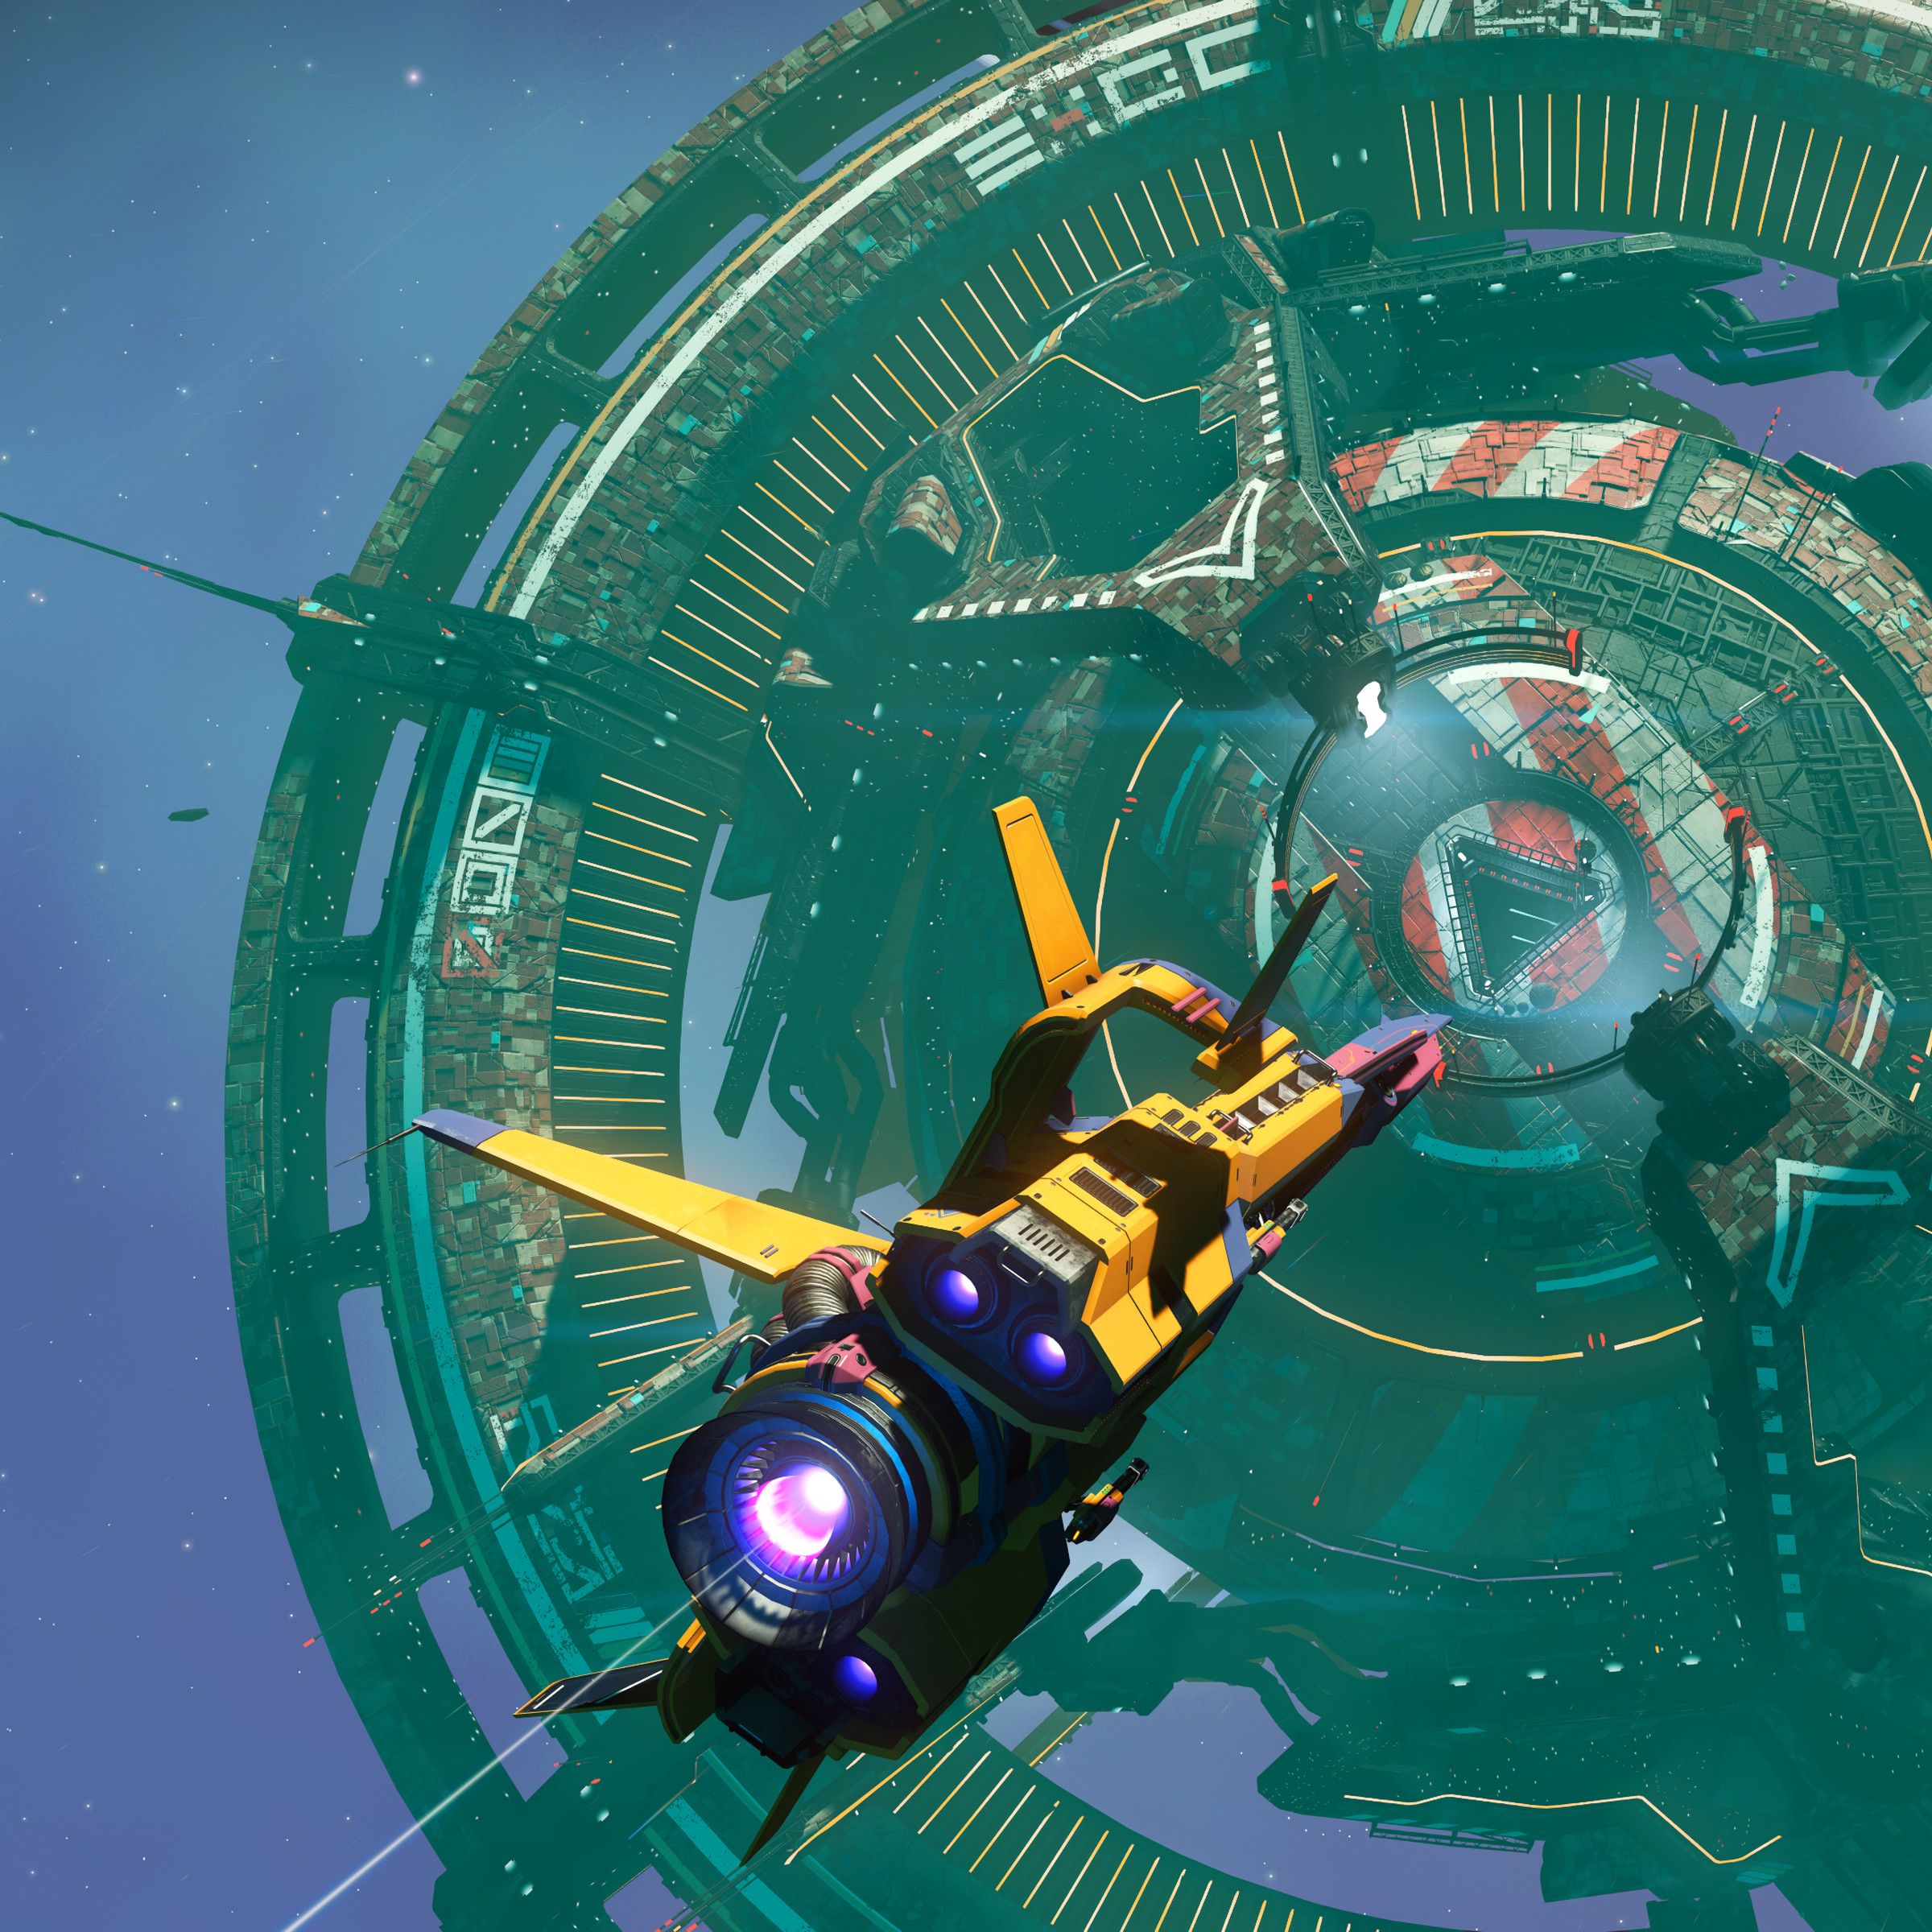 A screenshot from the video game No Man’s Sky.